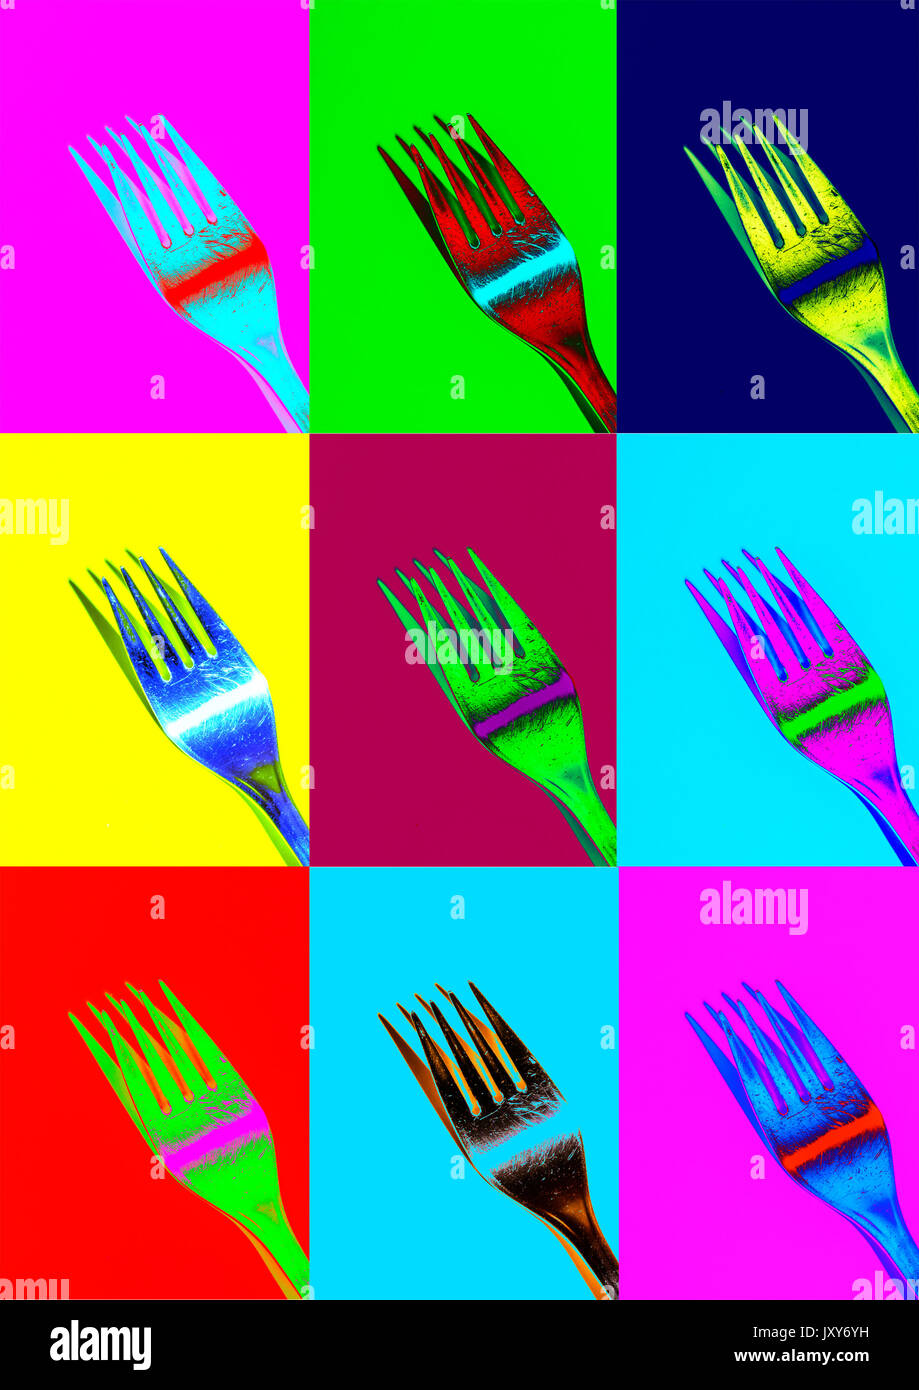 Colorful Forks on Bright Background in Pop Art Style Stock Photo